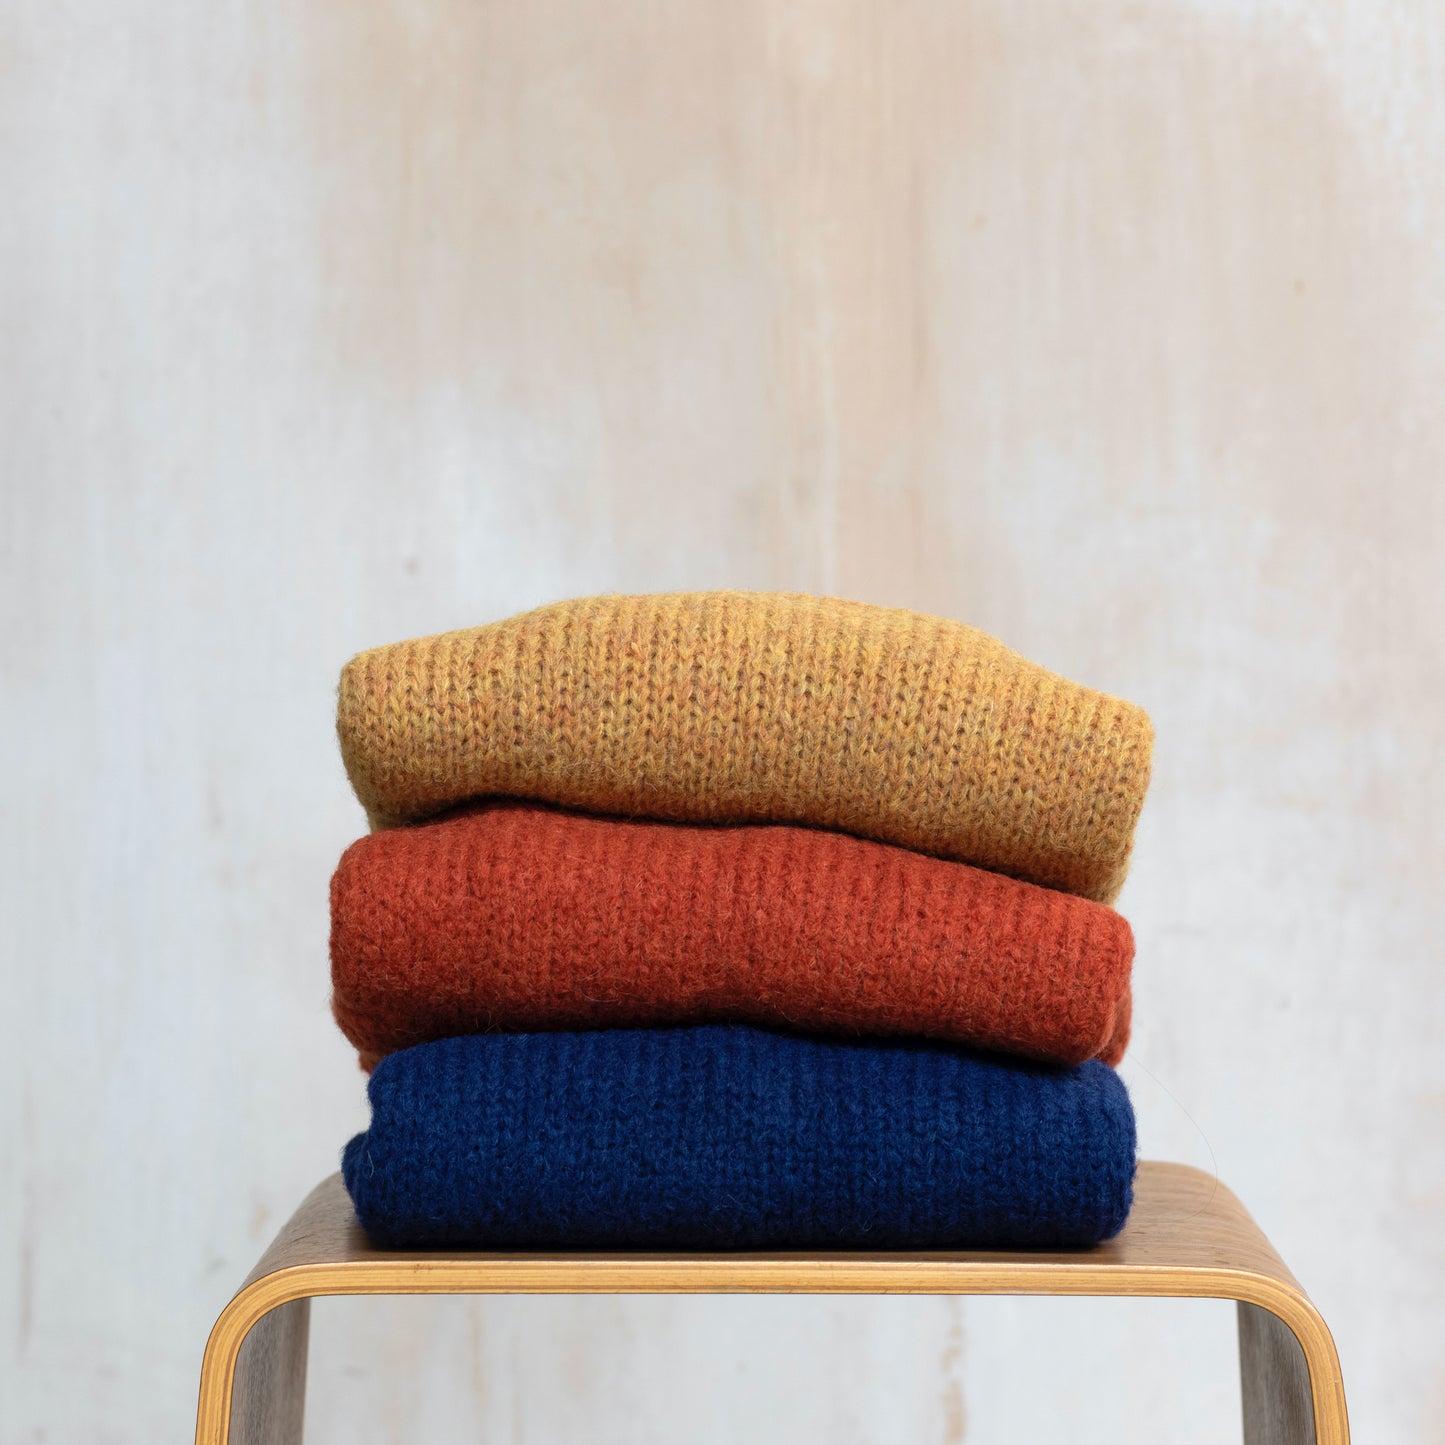 Three alpaca sweaters folded on a chair, yellow, orange and navy blue 